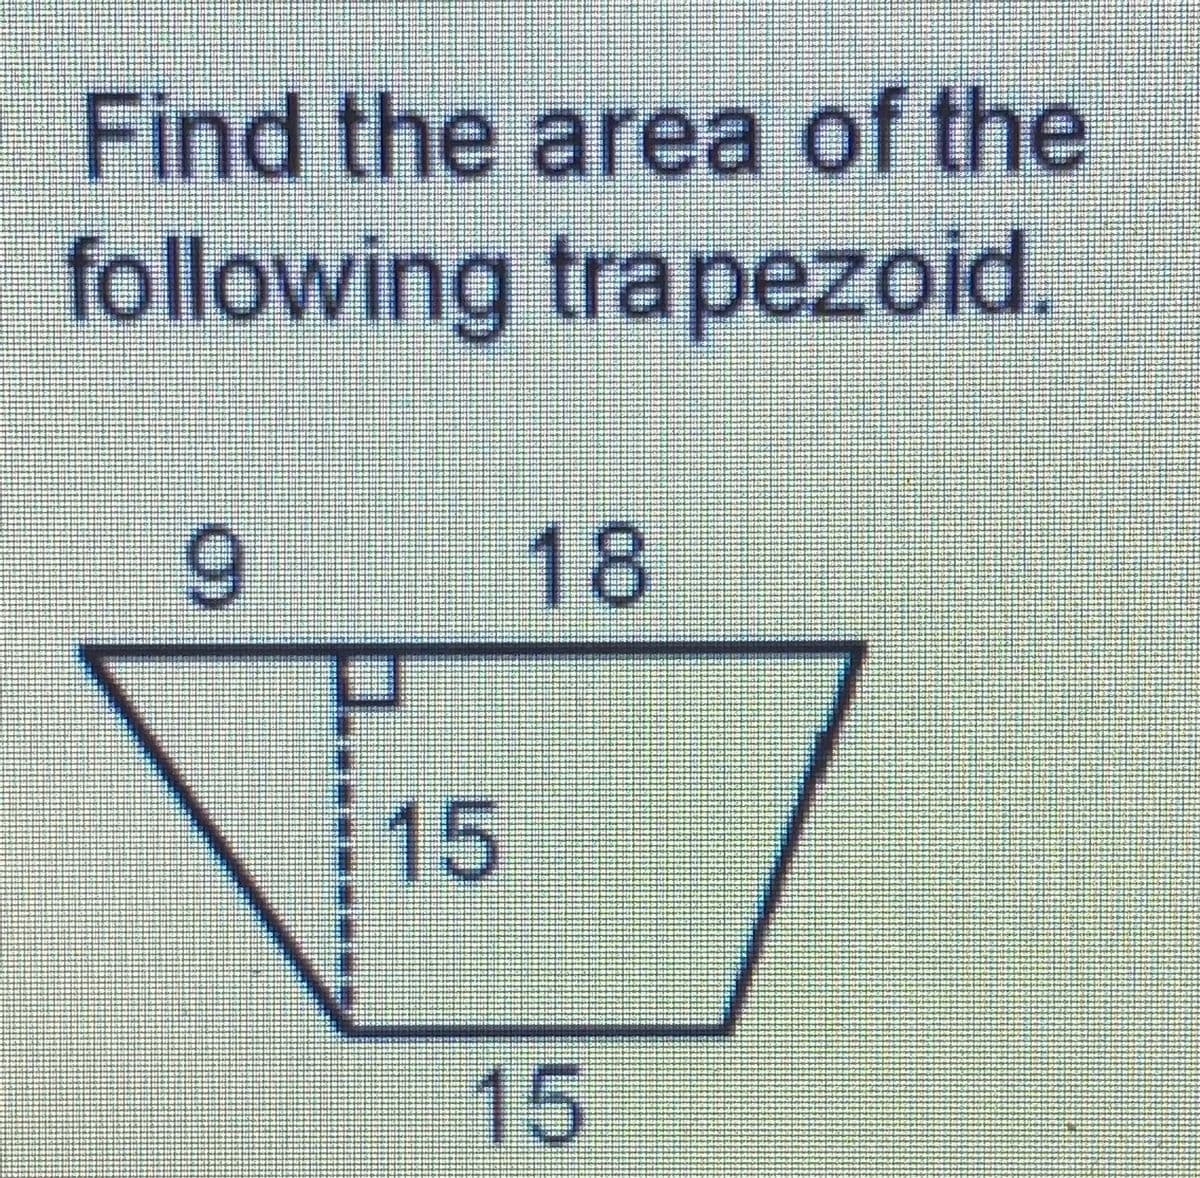 **Calculating the Area of a Trapezoid**

To find the area of a trapezoid, you can use the formula:

\[ \text{Area} = \frac{1}{2} \times (b_1 + b_2) \times h \]

where:
- \( b_1 \) is the length of the first base
- \( b_2 \) is the length of the second base
- \( h \) is the height of the trapezoid

**Problem**

Find the area of the following trapezoid.

The trapezoid has the following dimensions:
- The length of the top base, \( b_1 \), is 9 units.
- The length of the bottom base, \( b_2 \), is 15 units.
- The height, \( h \), is 15 units.
- An additional length in the diagram shows 18 units directly above the height, but it does not affect the final calculations for the area.

**Diagram Explanation**

- The trapezoid is depicted with a right angle indicating the height of 15 units.
- The top base is labeled as 9 units.
- The bottom base is labeled as 15 units.
- An internal segment (above the height) is labeled as 18 units, however, it is not needed for the area calculation.

**Solution**

Using the area formula for a trapezoid:

\[ \text{Area} = \frac{1}{2} \times (b_1 + b_2) \times h \]
\[ \text{Area} = \frac{1}{2} \times (9 + 15) \times 15 \]
\[ \text{Area} = \frac{1}{2} \times 24 \times 15 \]
\[ \text{Area} = 12 \times 15 \]
\[ \text{Area} = 180 \]

The area of the trapezoid is 180 square units.